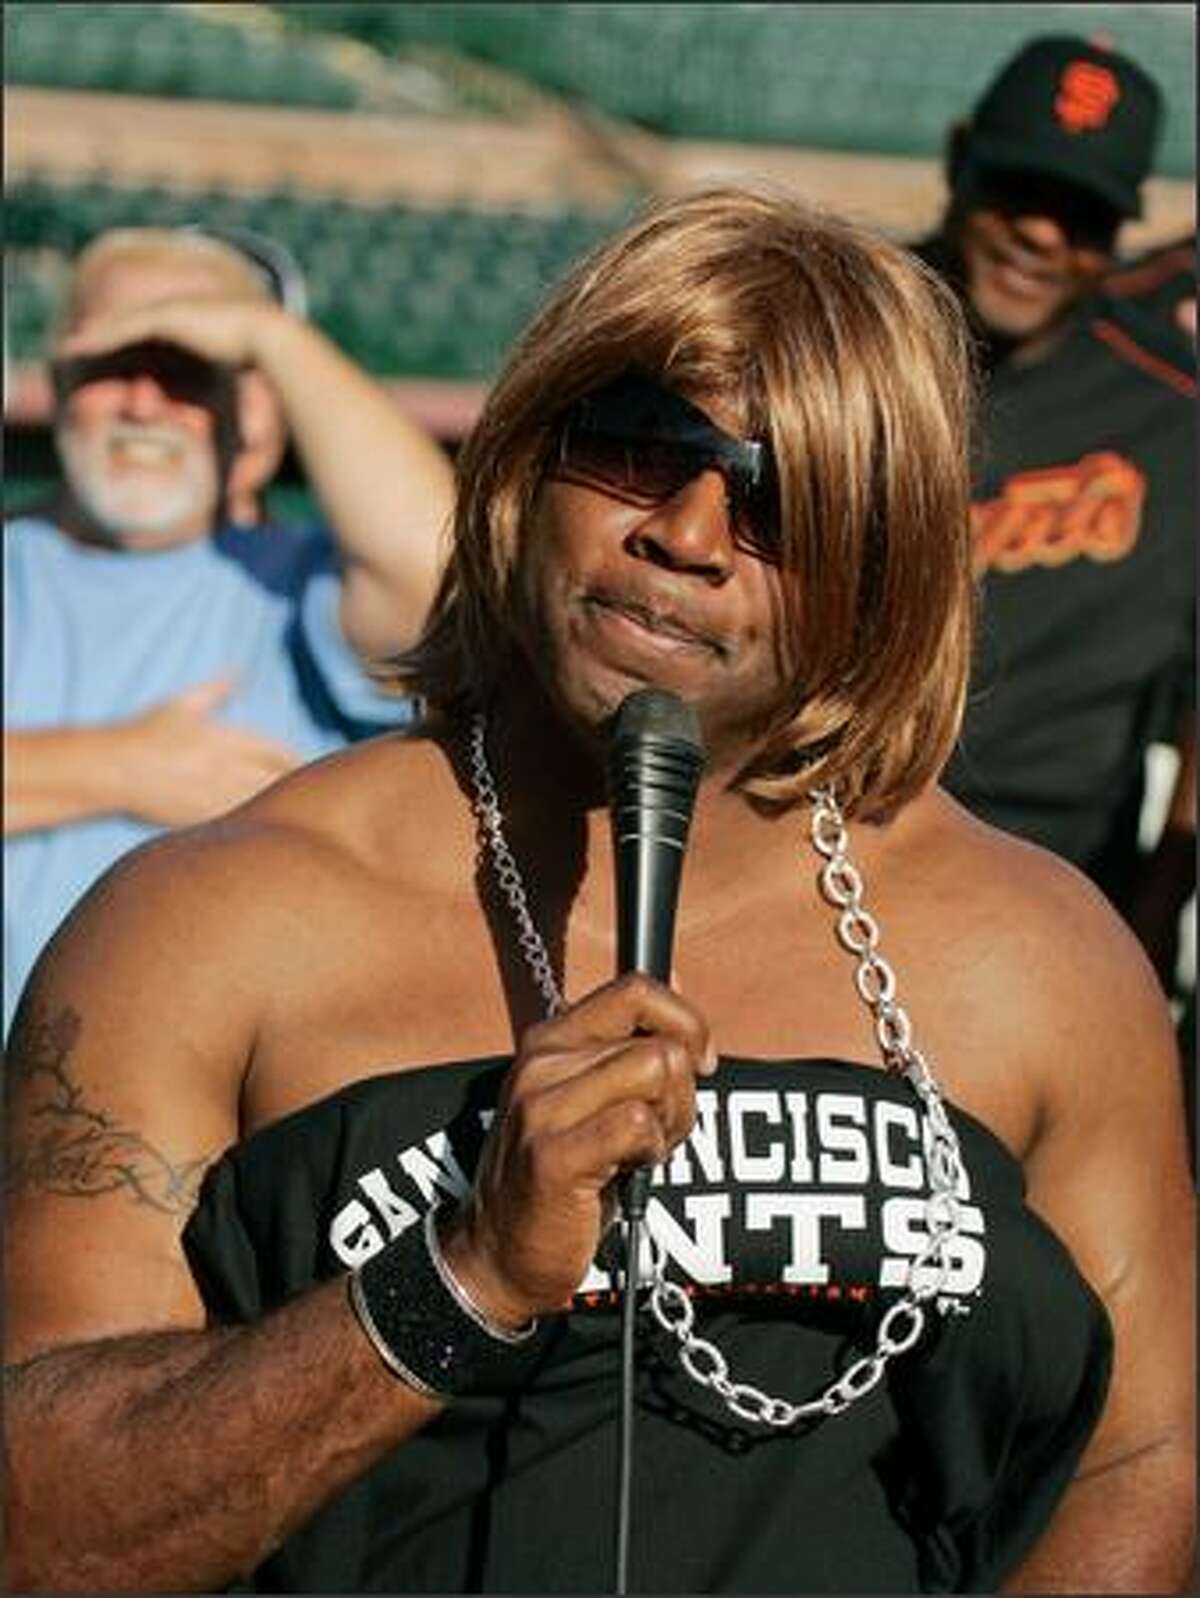 Bold and beautiful Barry Bonds gives Dennis Rodman a run for best baseball player in drag as he impersonates "American Idol's" Paula Abdul during spring training.